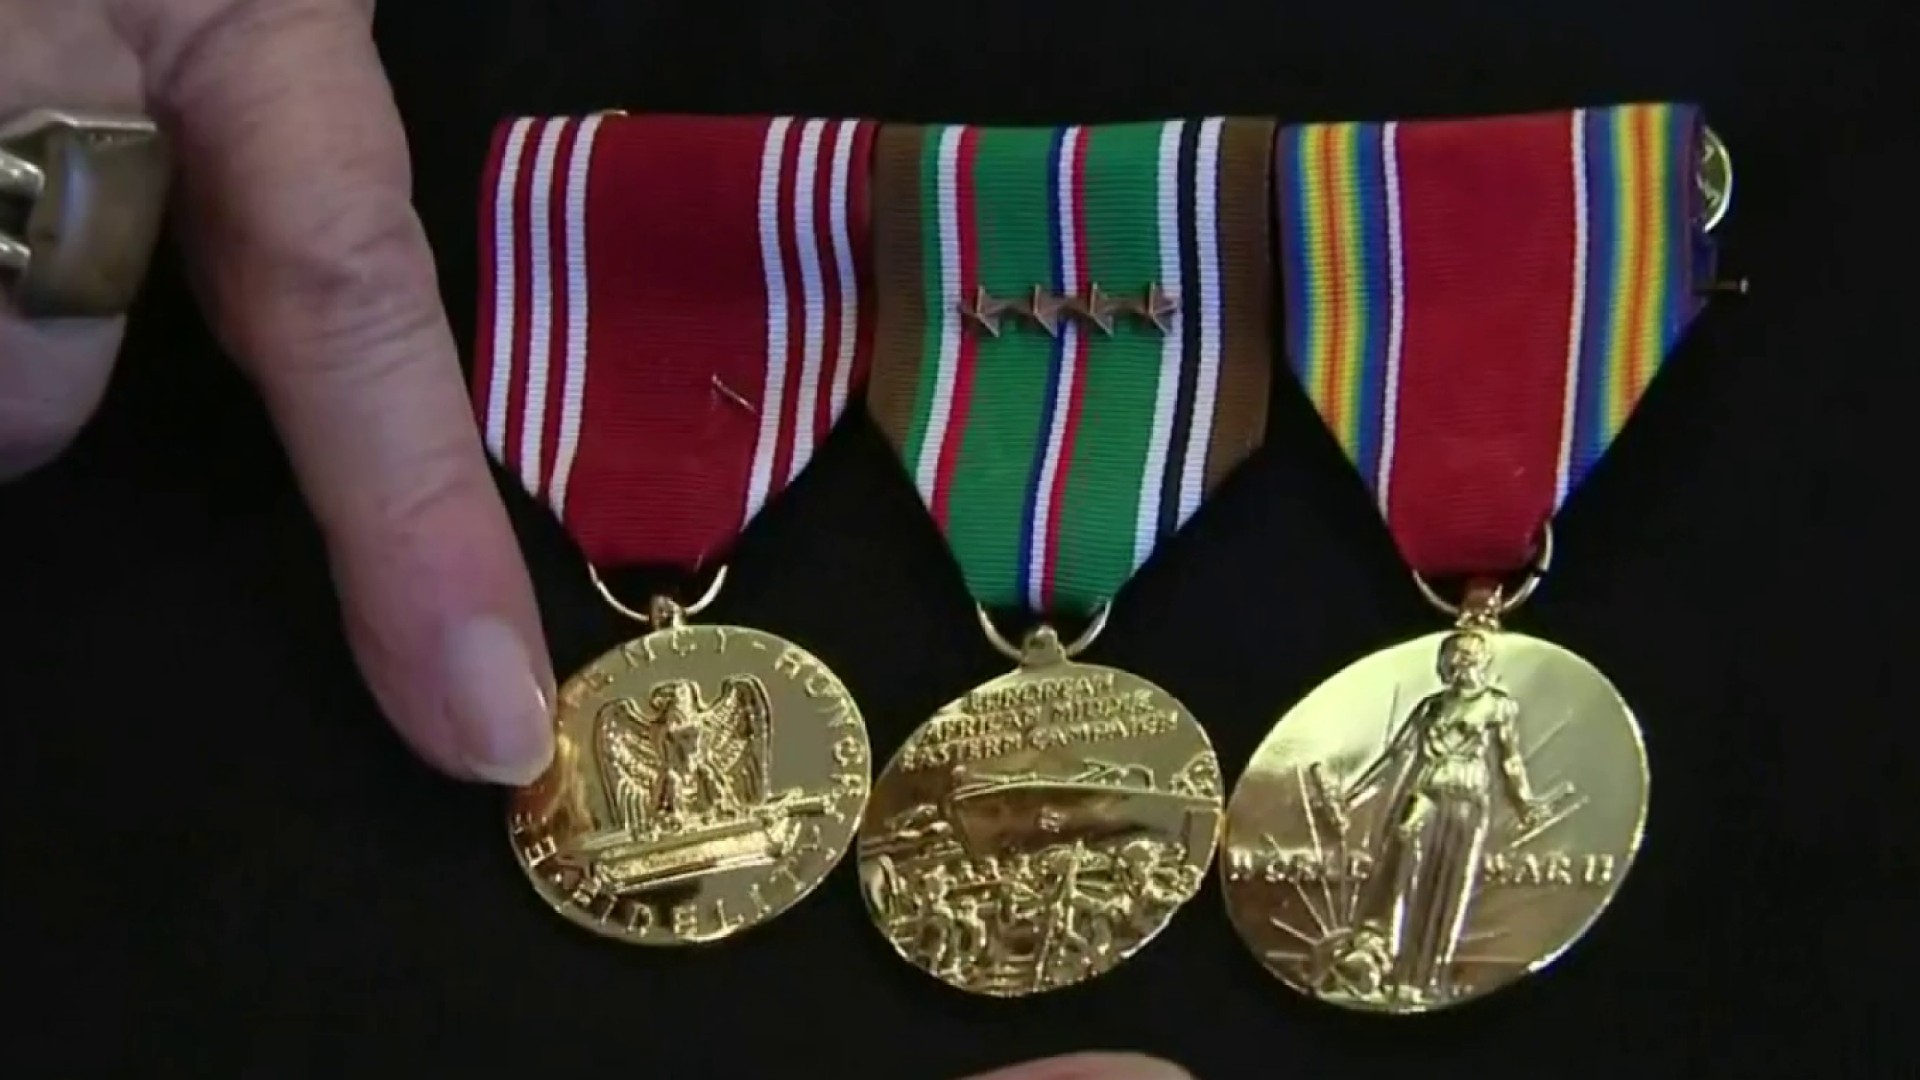 WWII veteran from Metro Detroit honored with medals earned decades ago - WDIV ClickOnDetroit